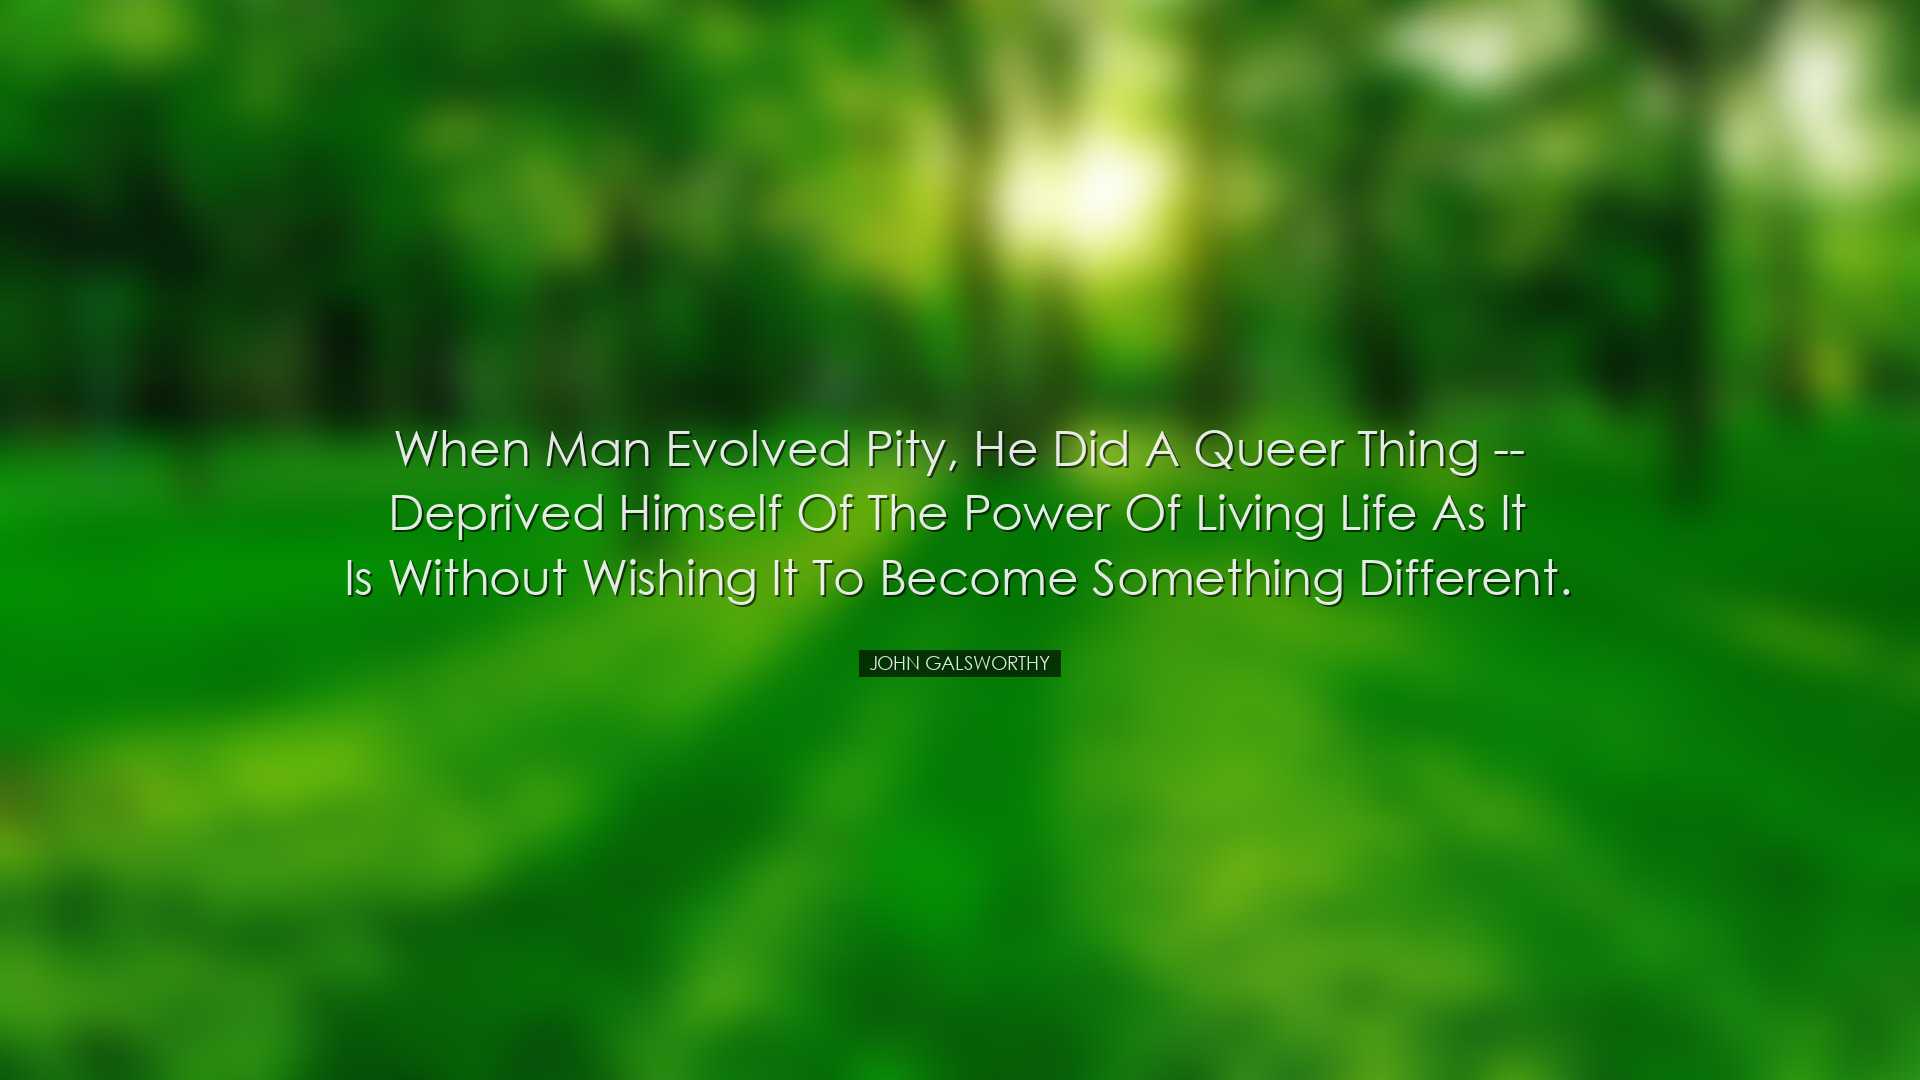 When Man evolved Pity, he did a queer thing -- deprived himself of